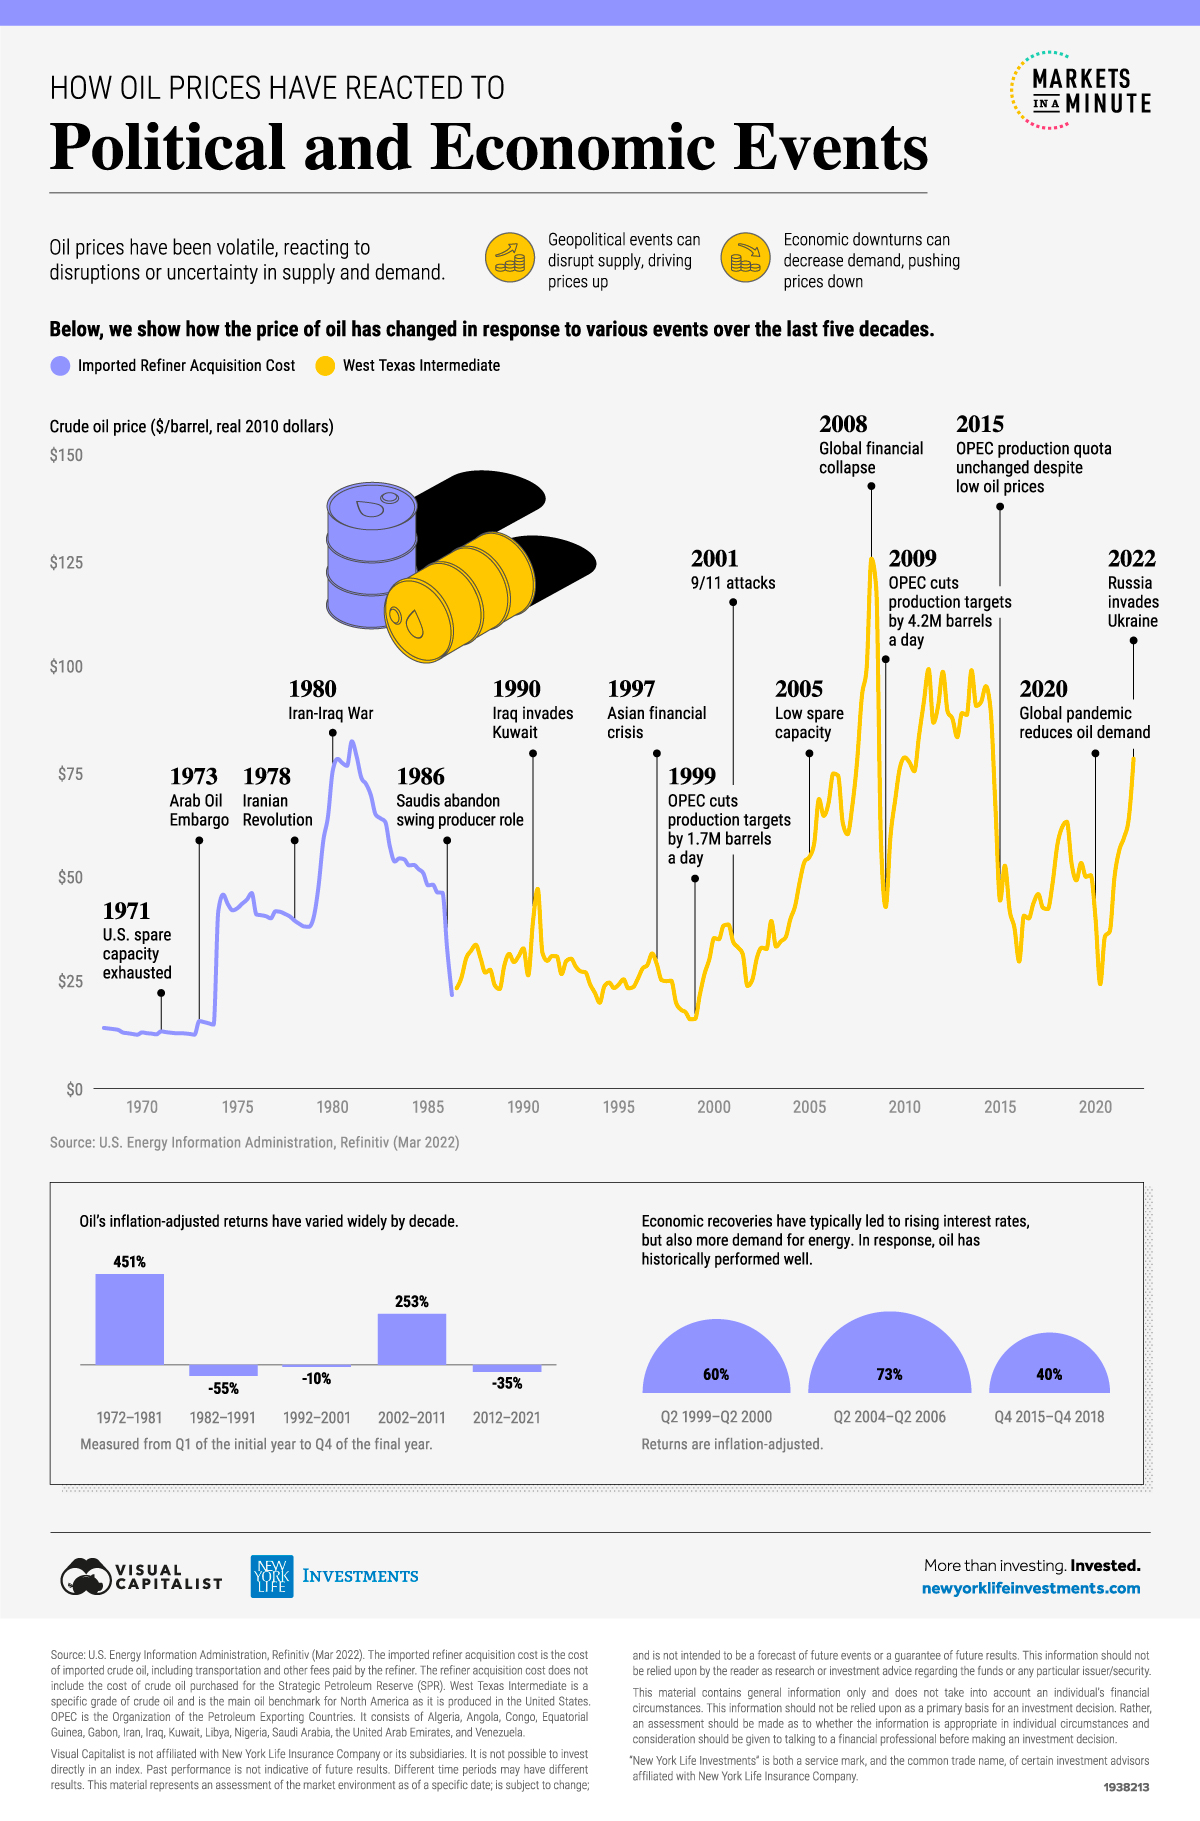 Line chart shows historical oil prices from 1968-2022 with annotations to show what happened during major events. For instance, the price of oil dropped during the global financial crisis and rose during the war in Ukraine.